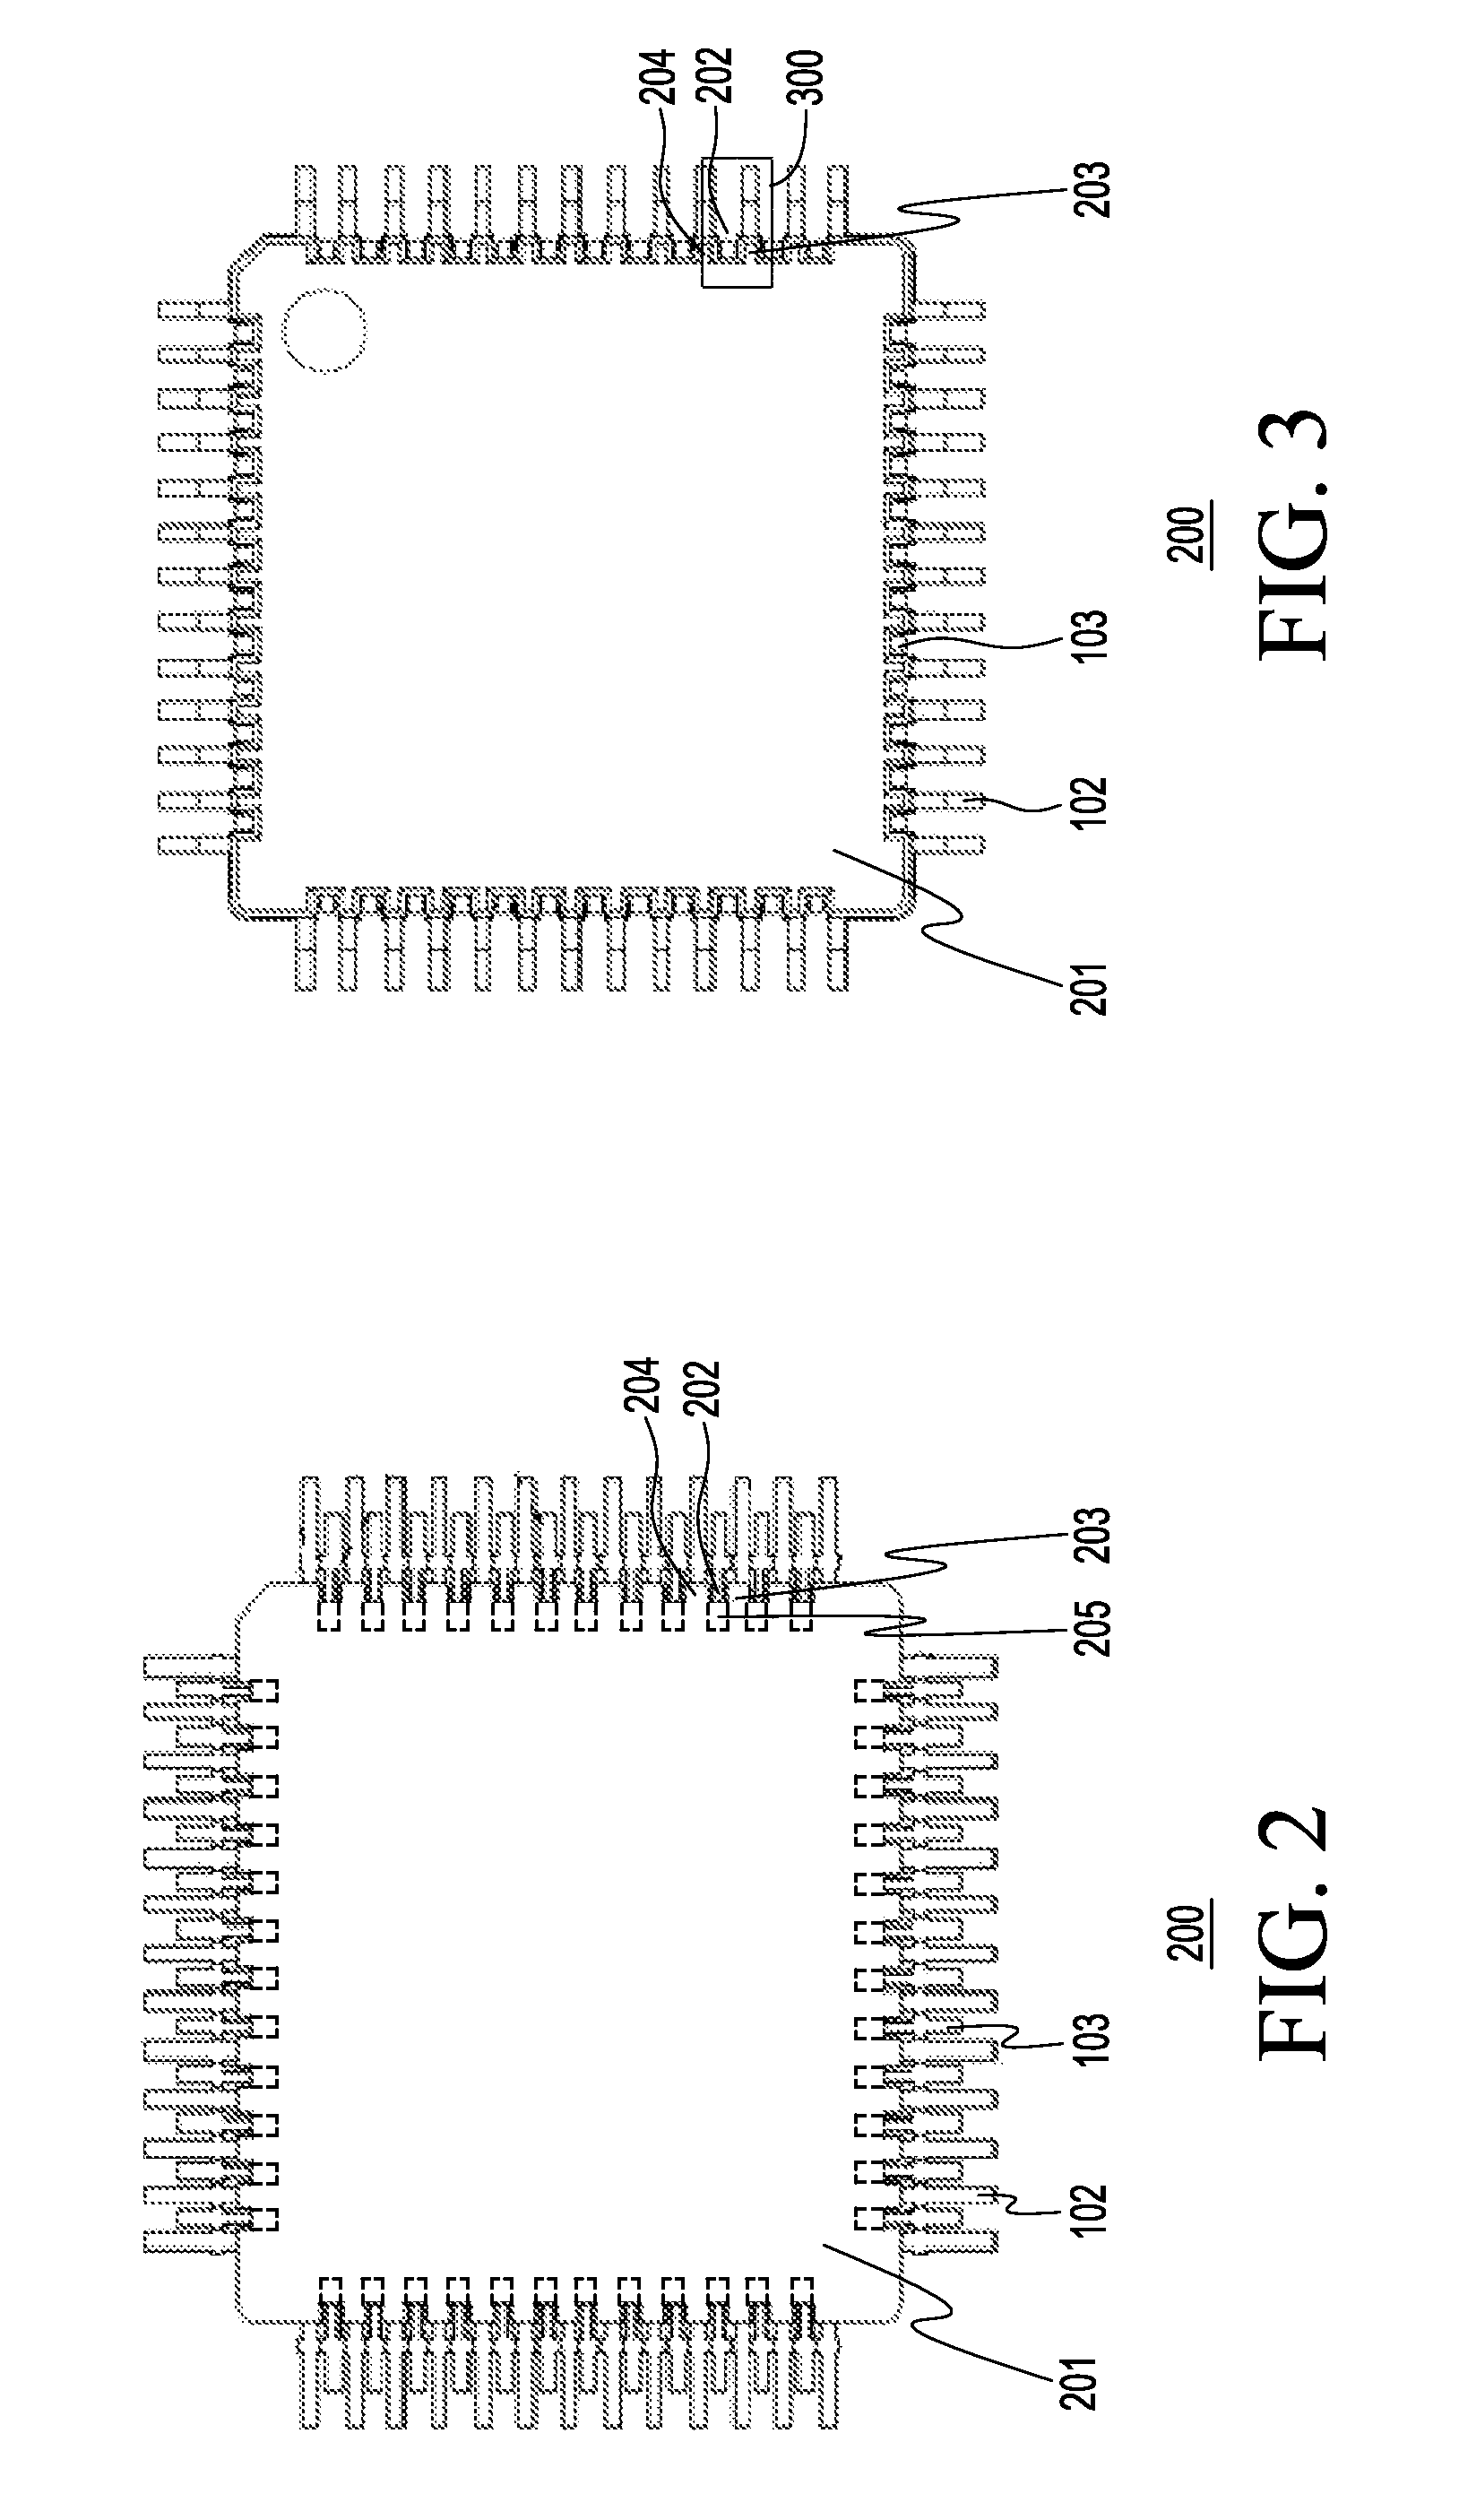 Semiconductor device with webbing between leads